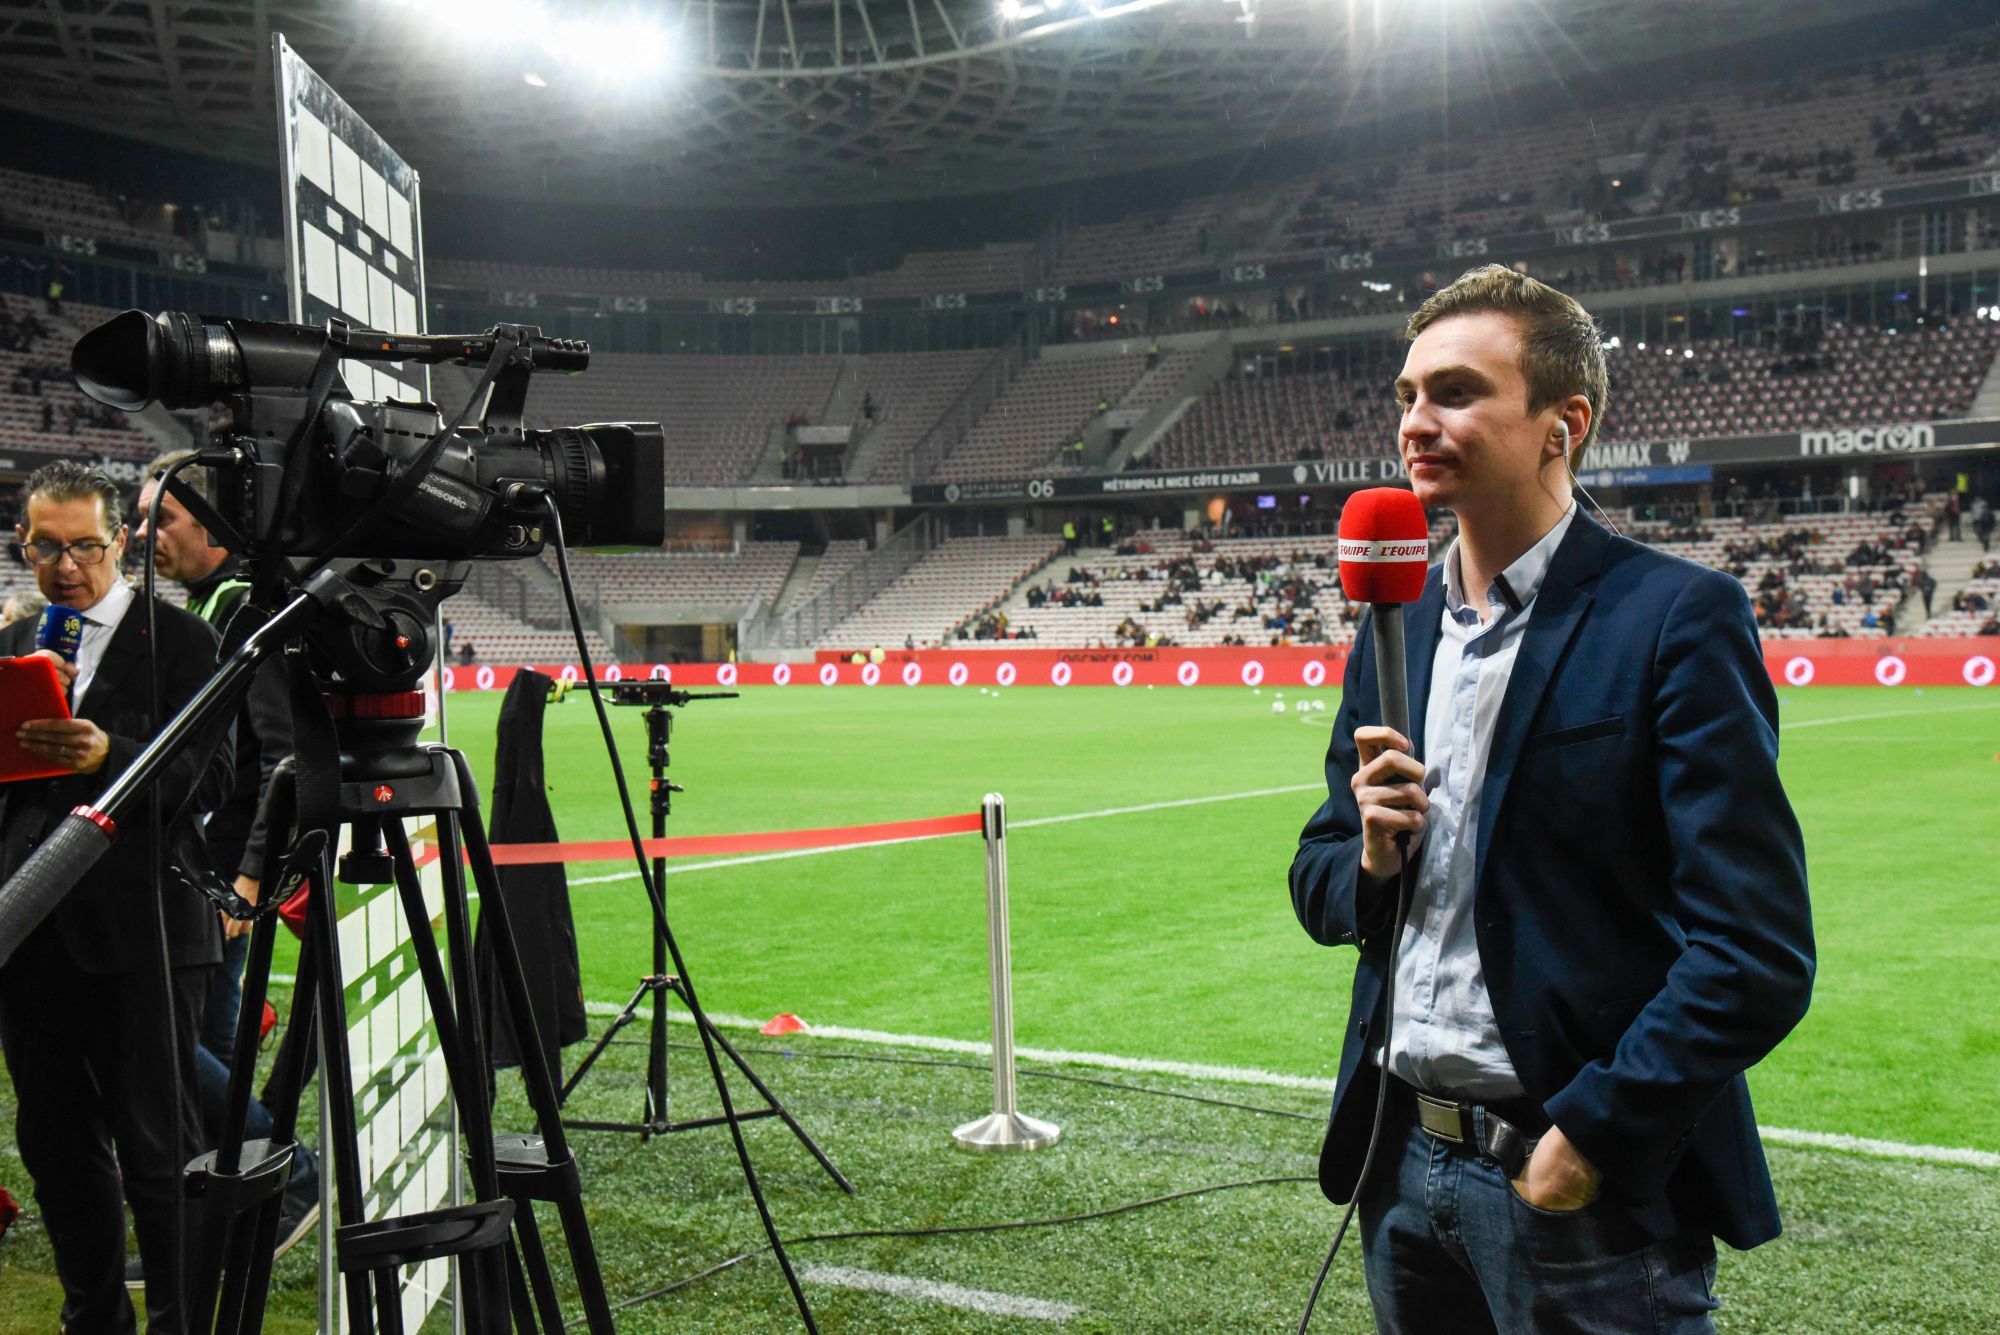 Bertrand LATOUR of L'Equipe TV during the Ligue 1 match between OGC Nice and Paris Saint Germain on October 18, 2019 in Nice, France. (Photo by Pascal Della Zuana/Icon Sport) - Bertrand LATOUR - Allianz Riviera - Nice (France)